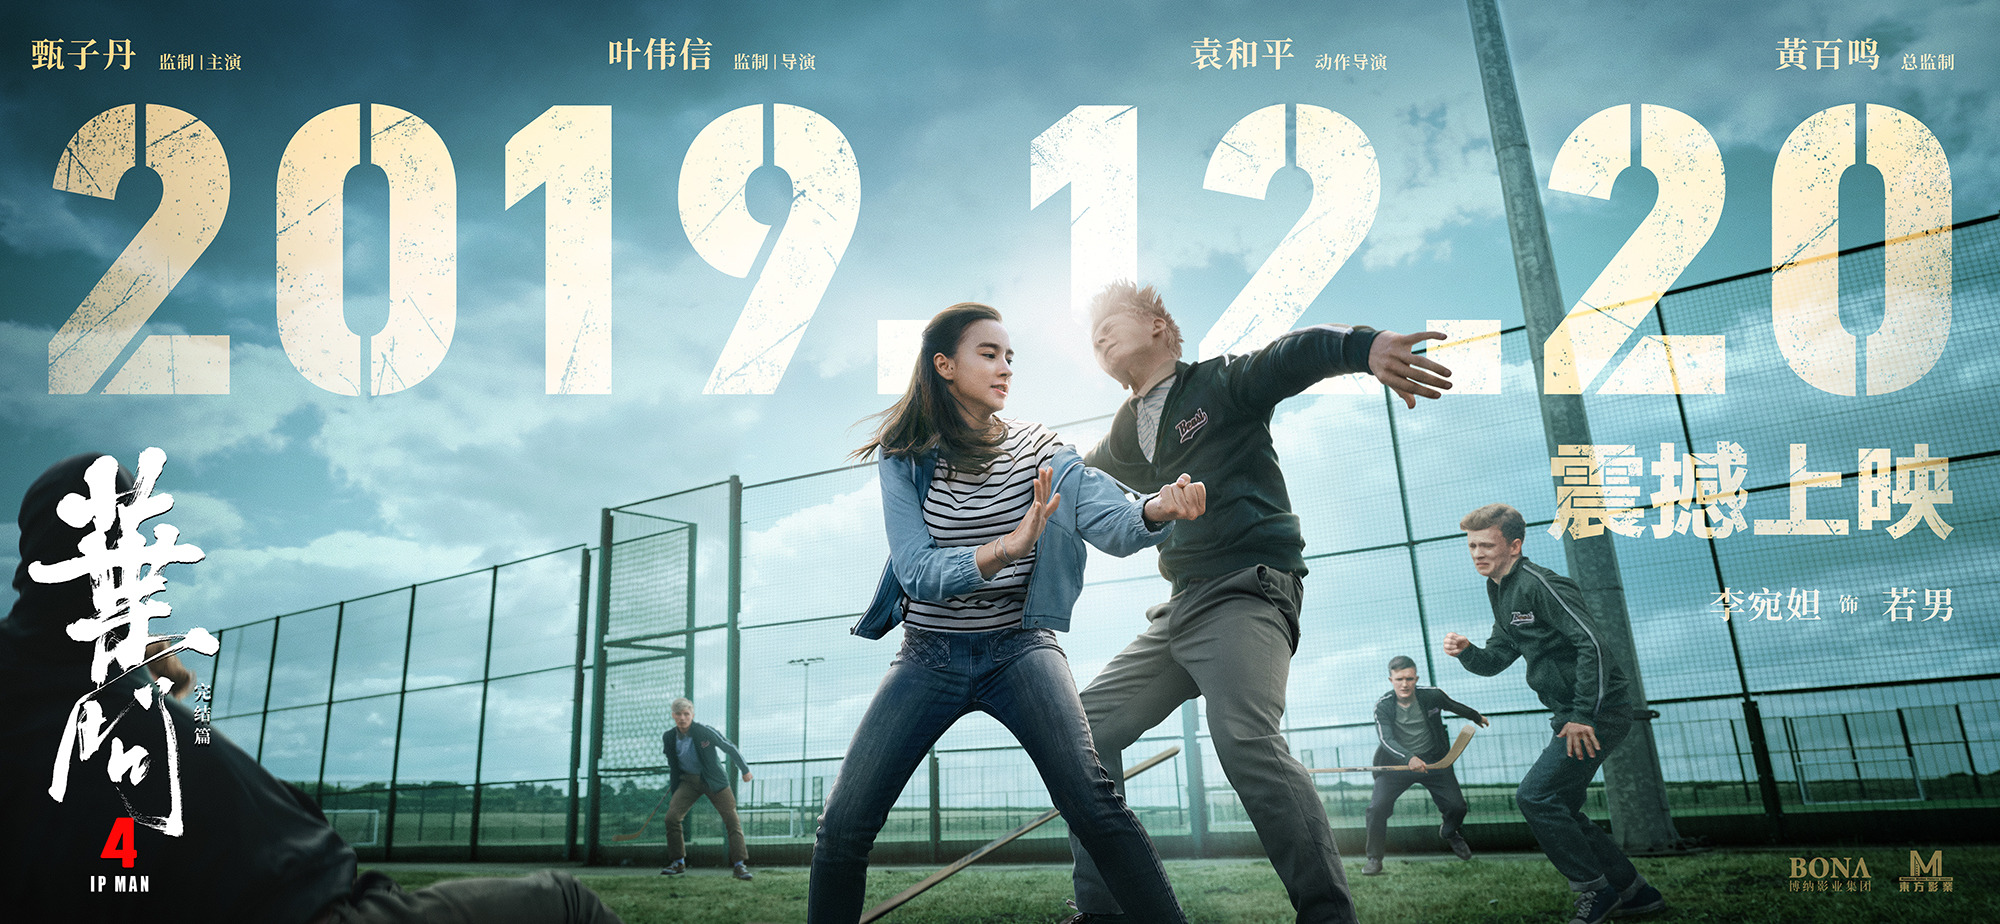 Mega Sized Movie Poster Image for Yip Man 4 (#6 of 15)